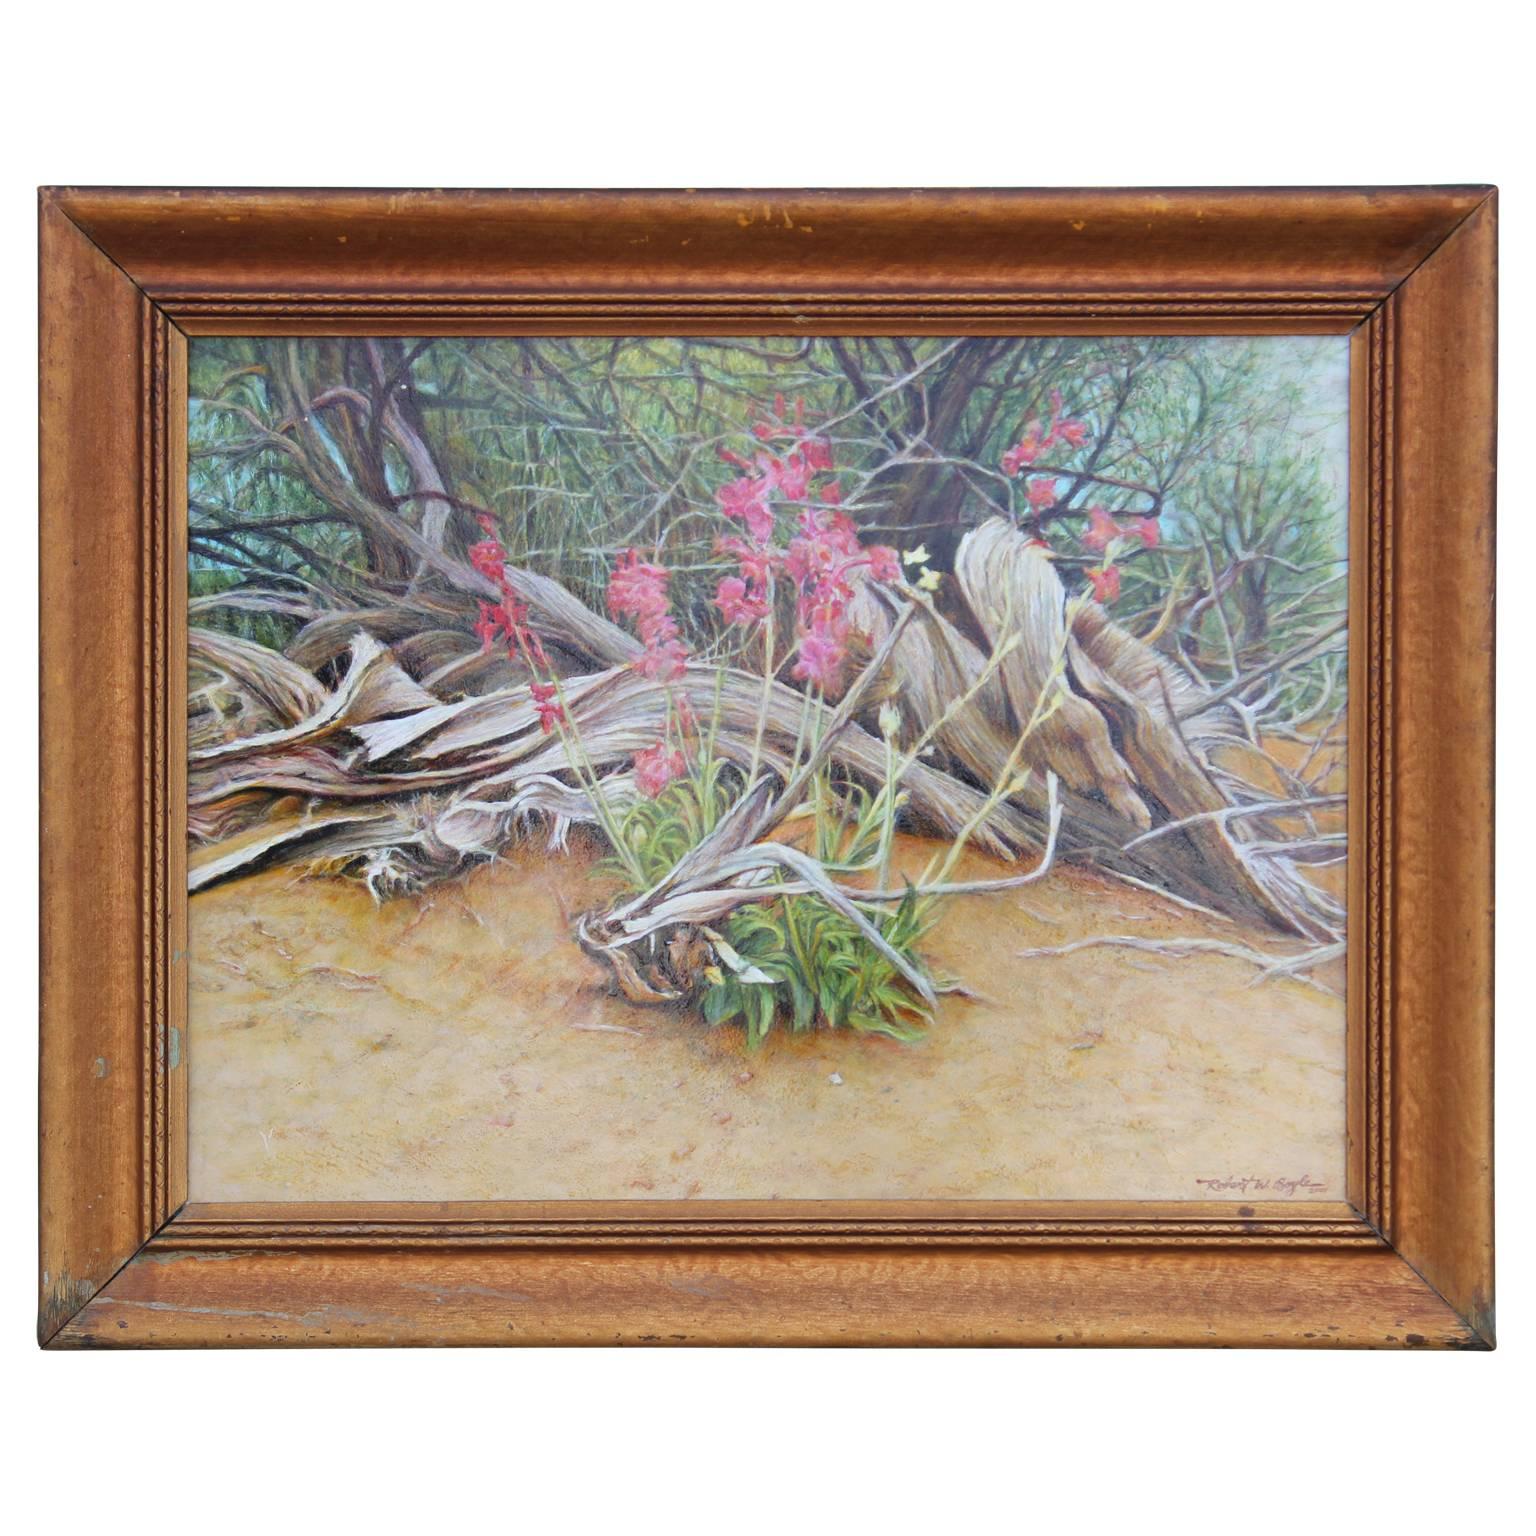 Robert W. Boyle Landscape Painting - Dried Desert Brush with Pink Flowers Realist Painting